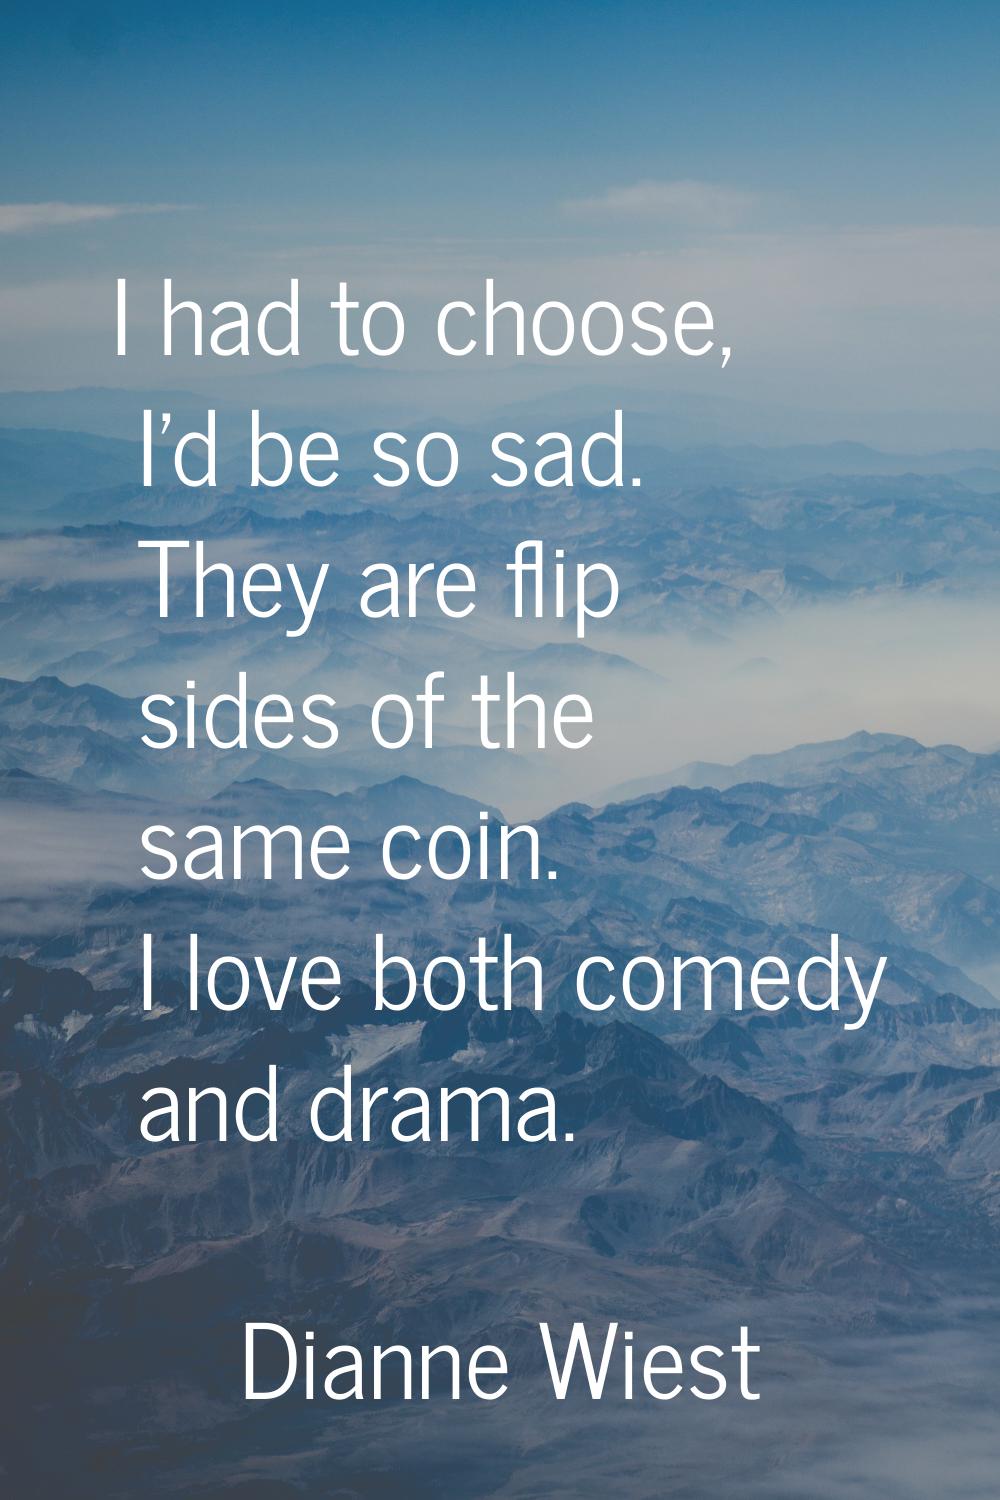 I had to choose, I'd be so sad. They are flip sides of the same coin. I love both comedy and drama.